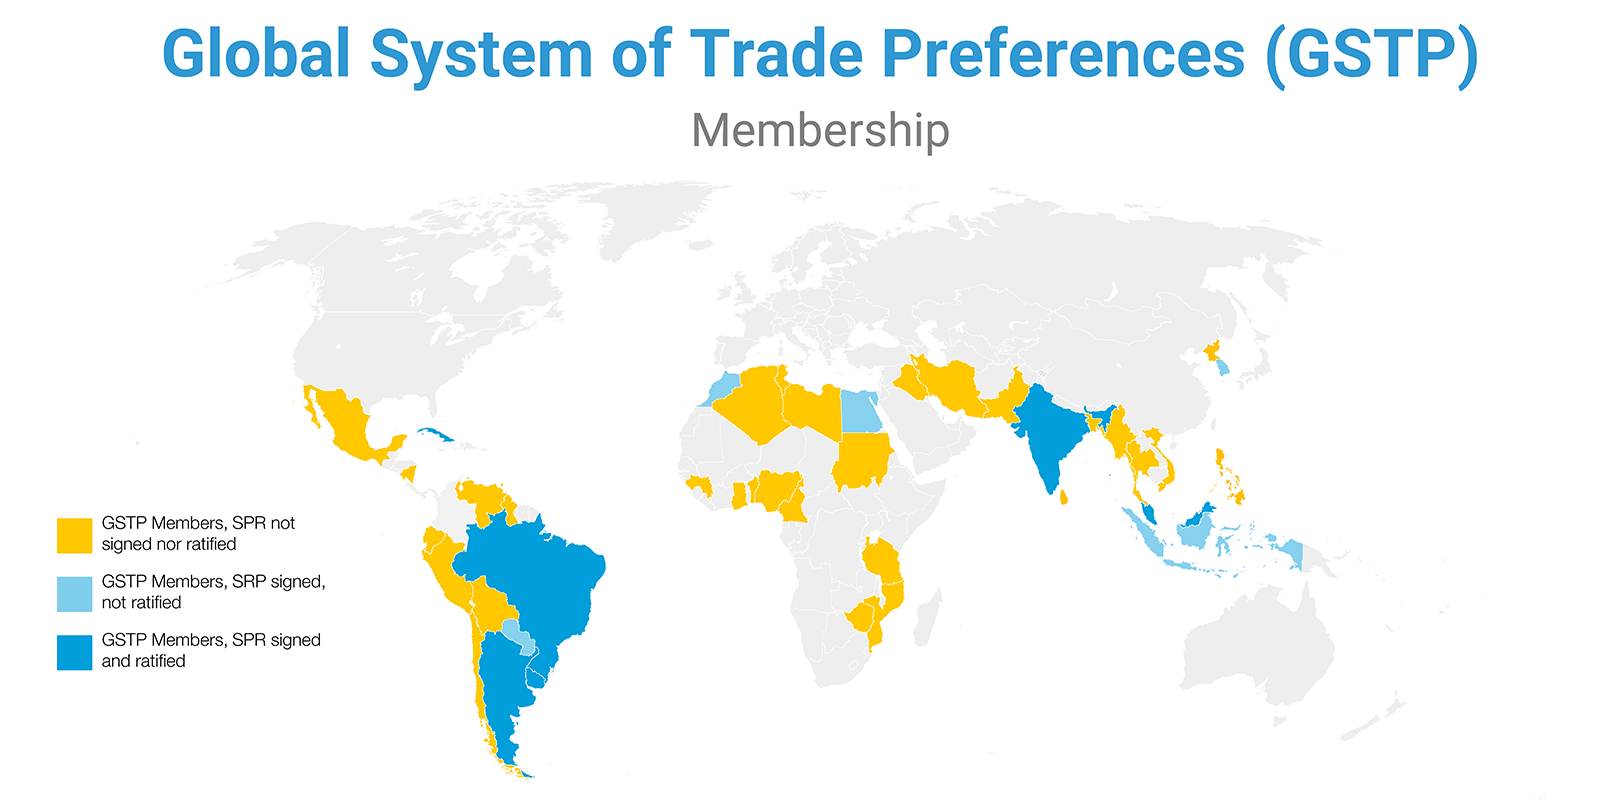 Global System of Trade Preferences: map of membership